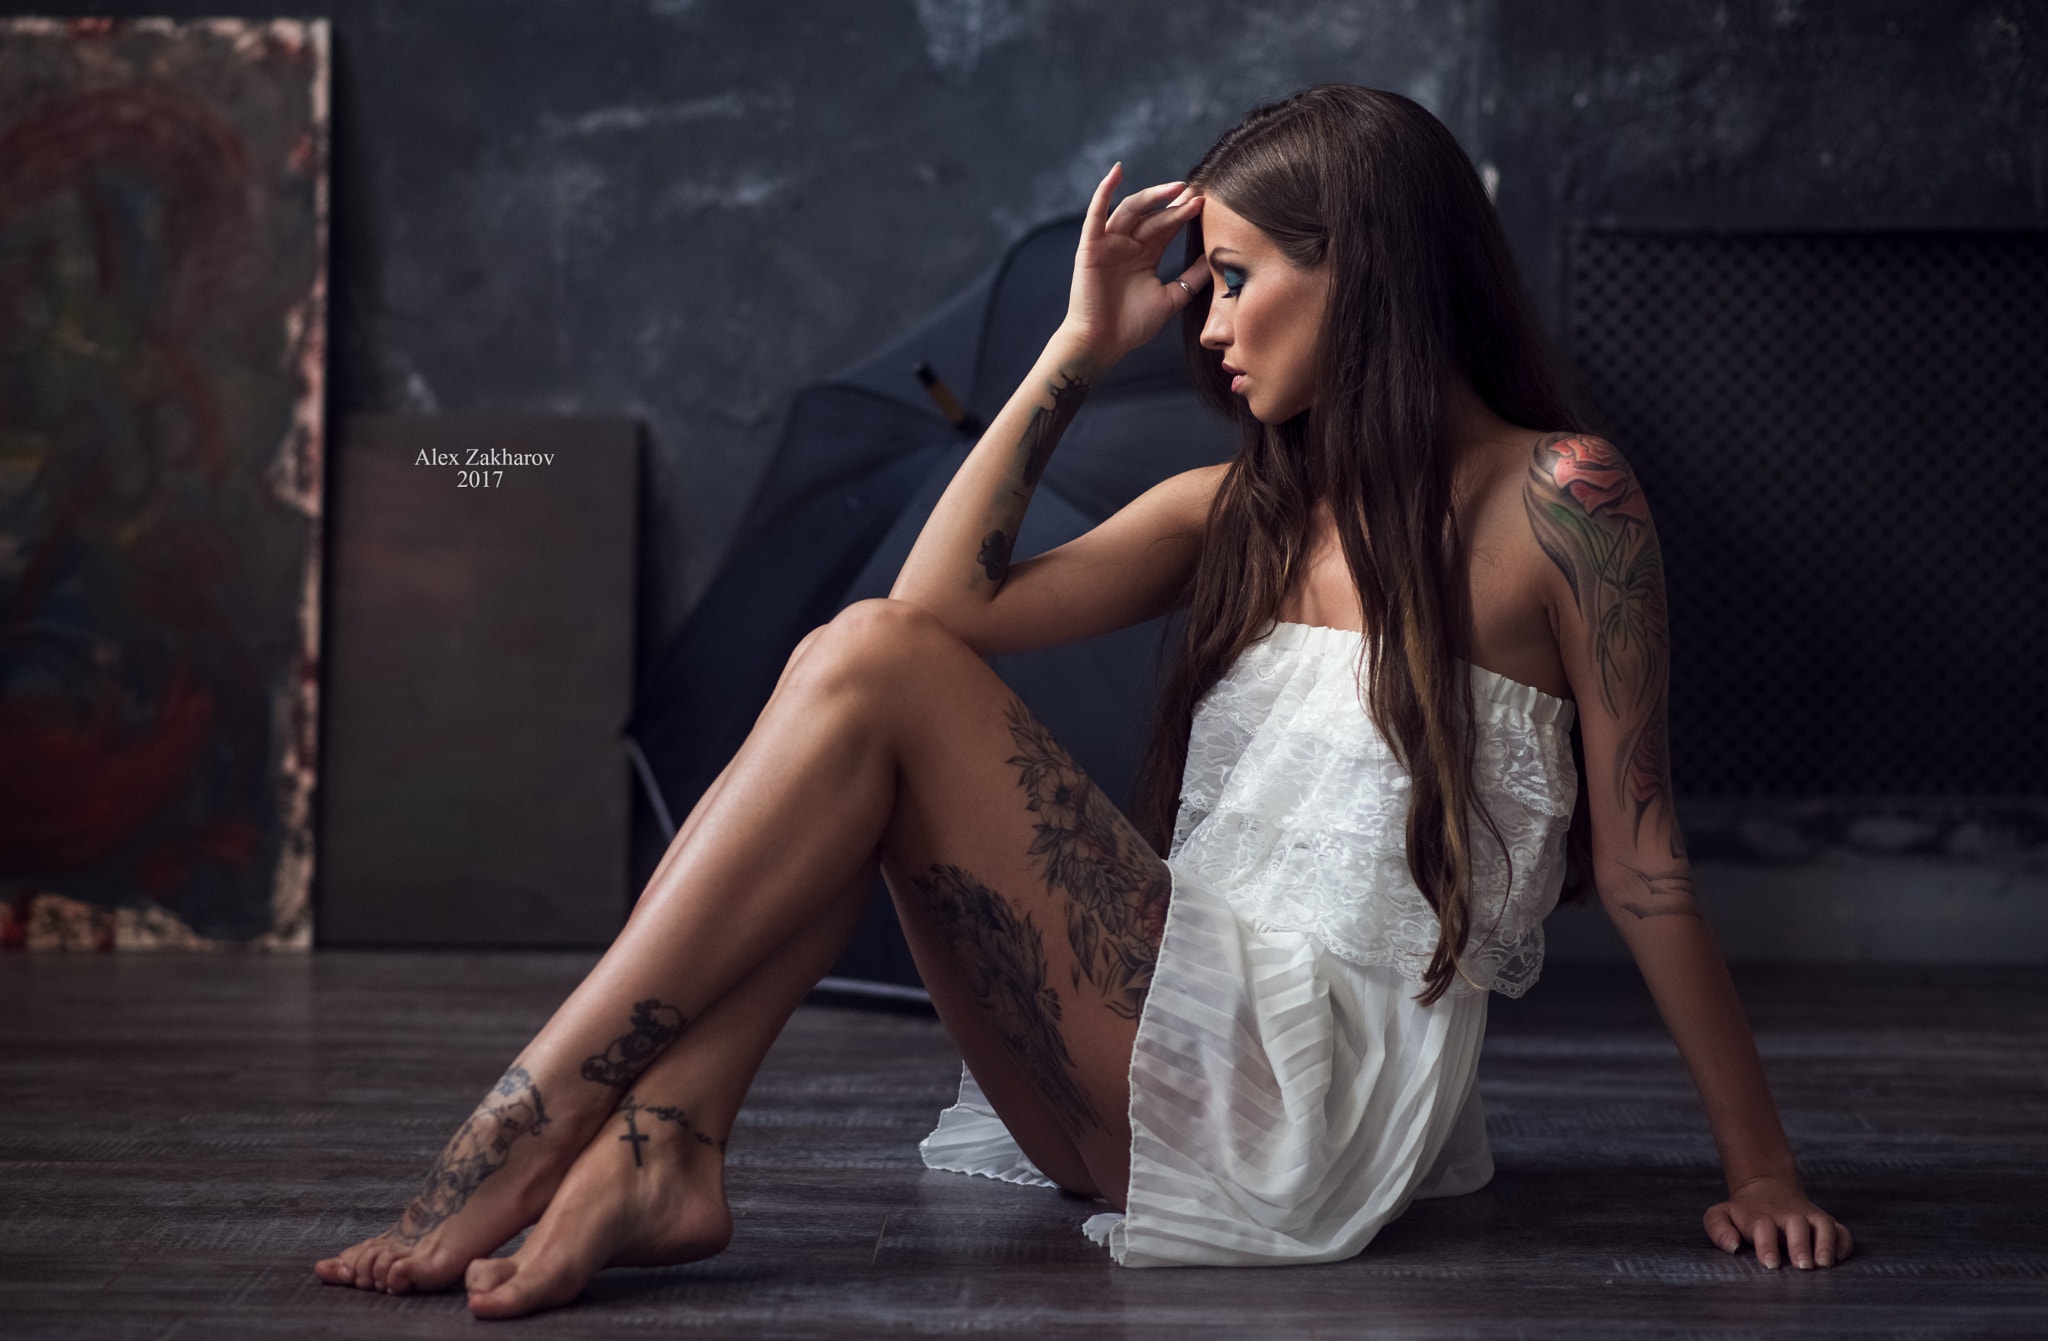 People 2048x1341 women tanned sitting tattoo closed eyes dress on the floor Alex Zakharov barefoot brunette watermarked indoors